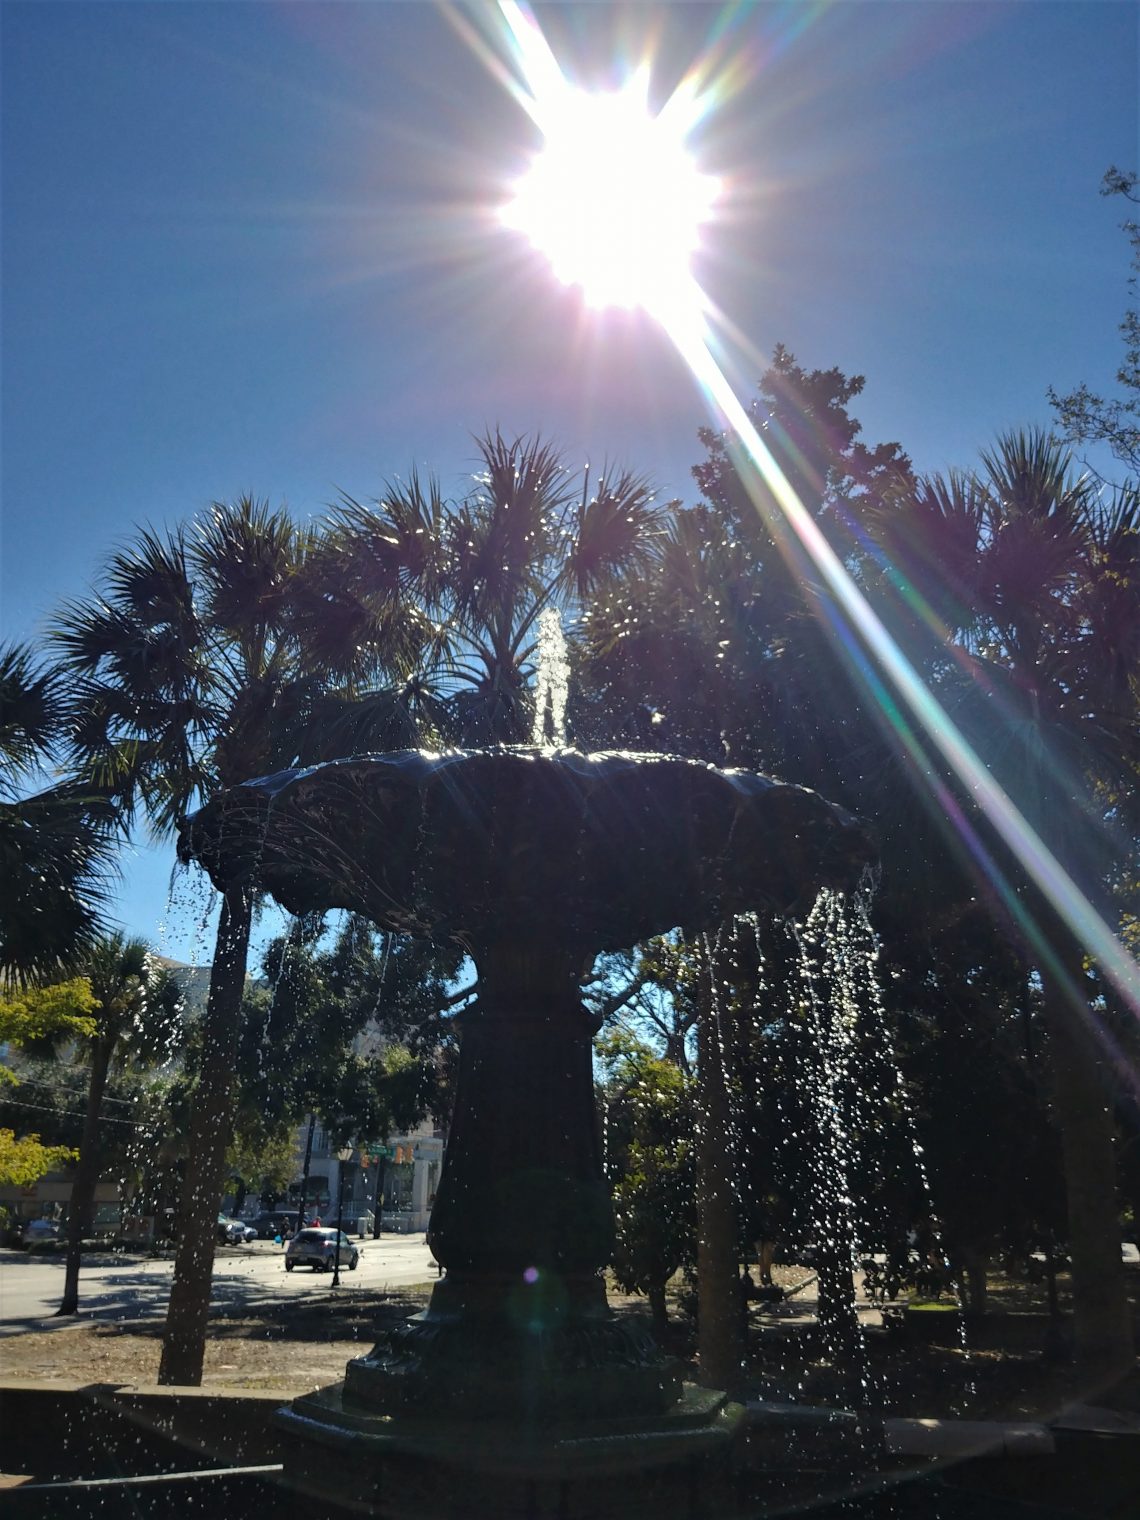 This beautiful fountain can be found on the Meeting Street side of Marion Square, which from 1843 until 1922 was called Citadel Green -- as the space was used to muster troops and the Citadel once occupied the space to the north of the park.